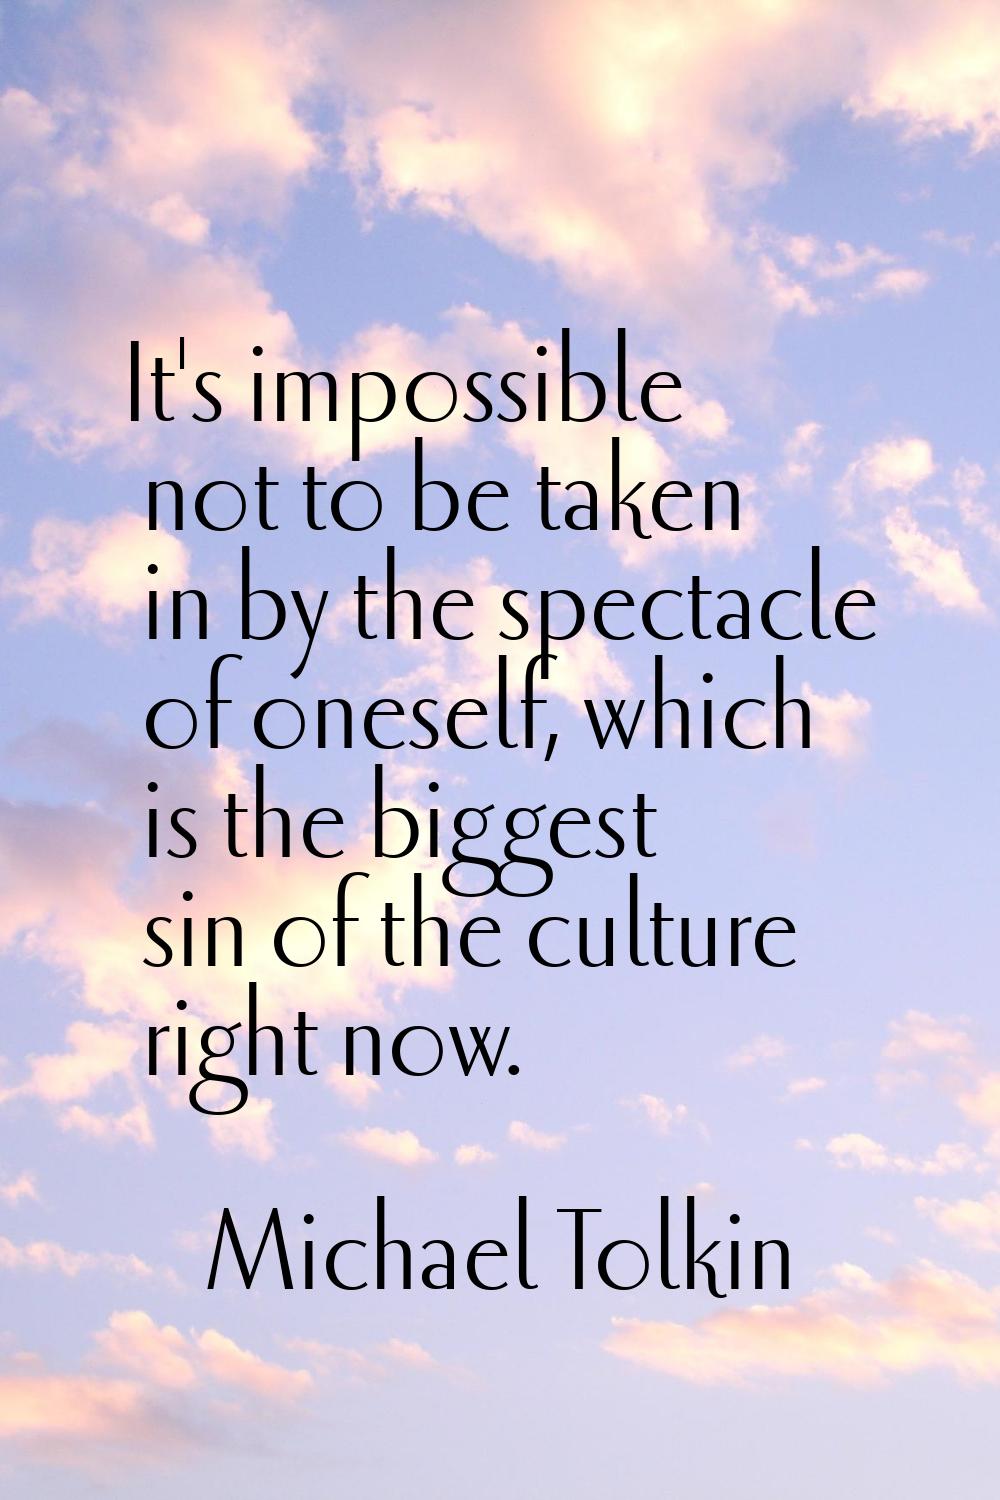 It's impossible not to be taken in by the spectacle of oneself, which is the biggest sin of the cul